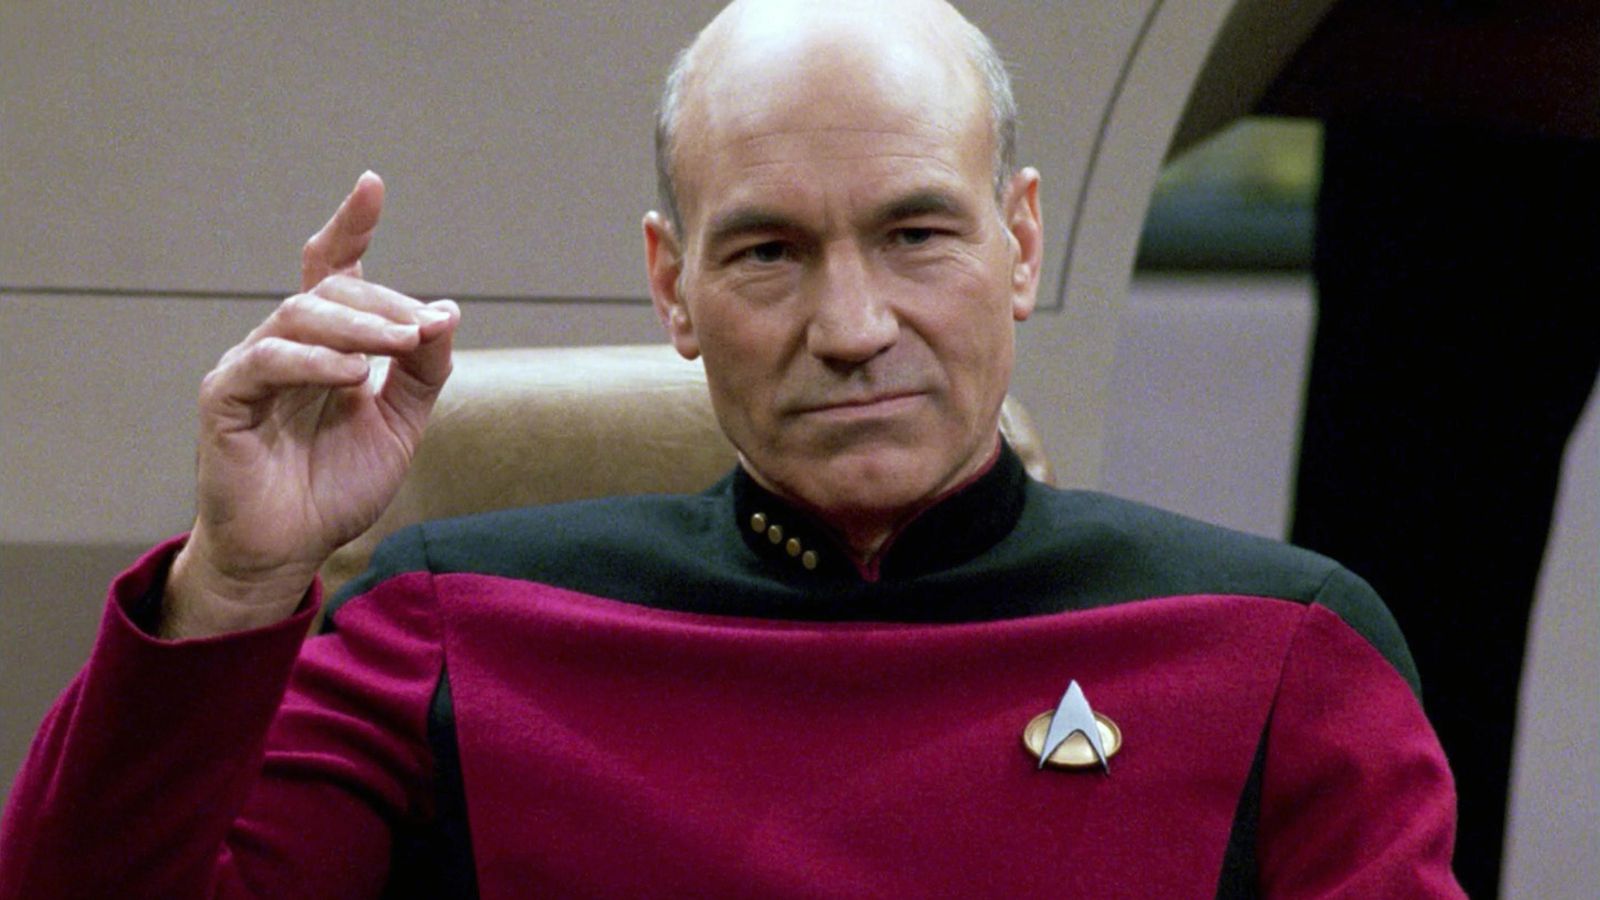 Patrick Stewart’s Jean Luc Picard is Returning to Star Trek on CBS All Access